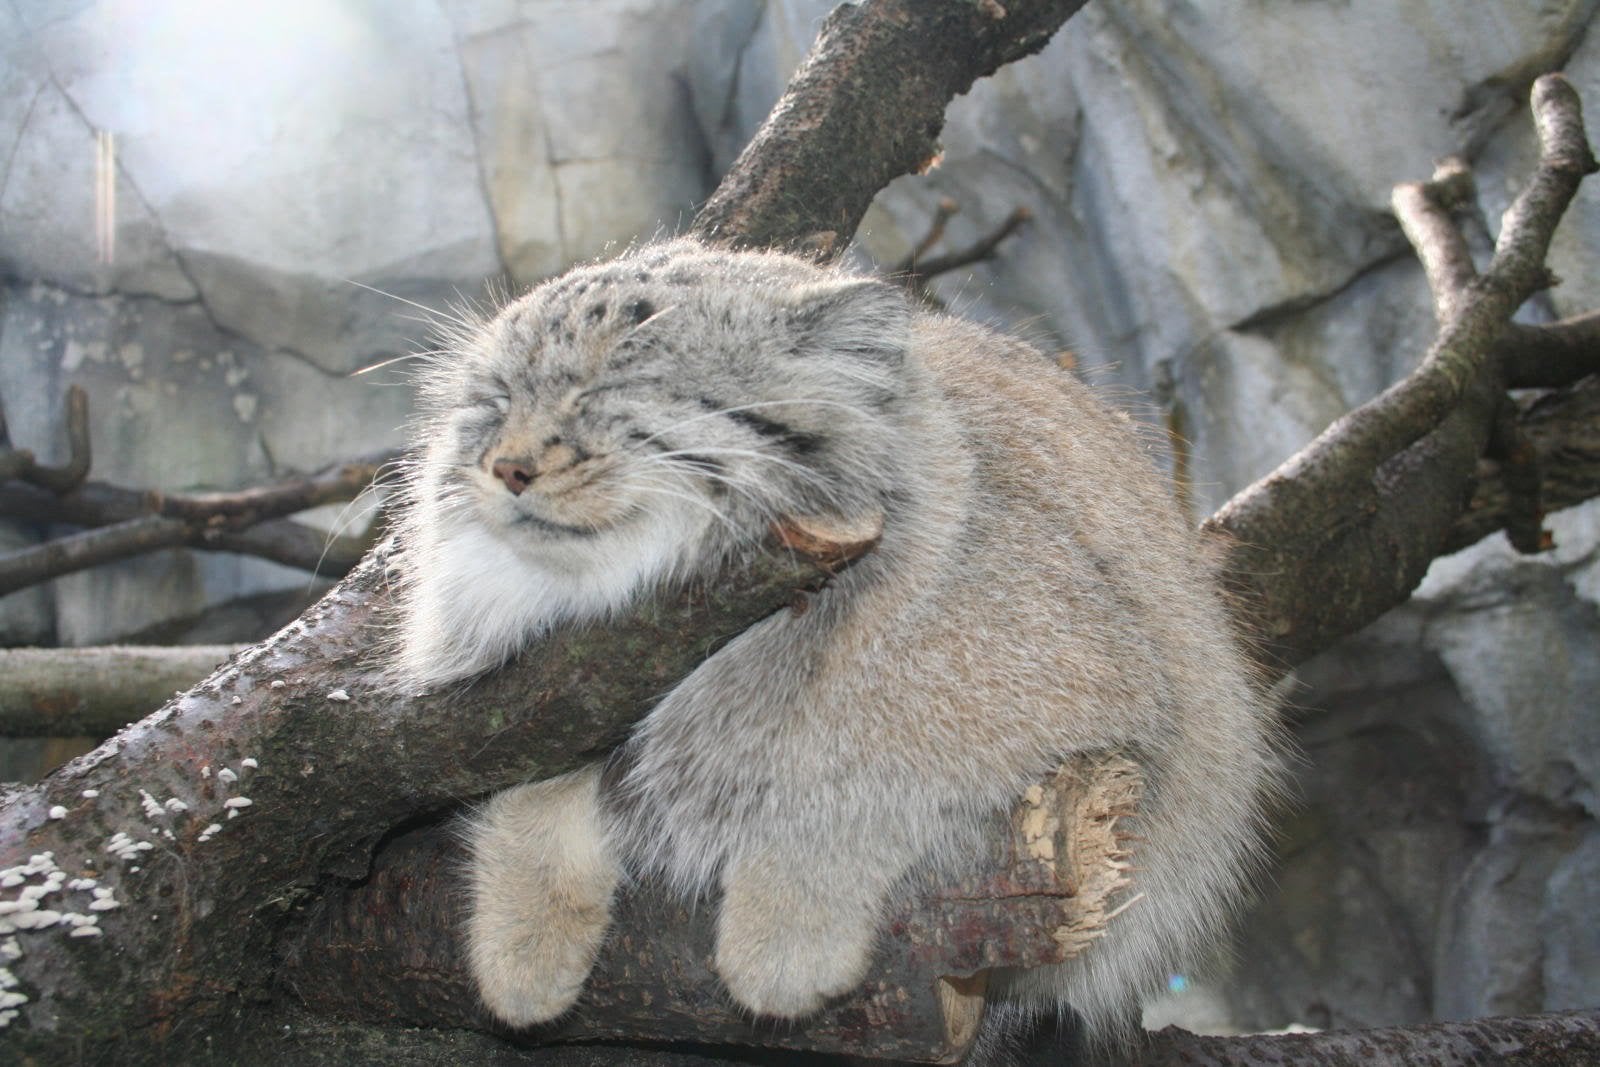 manul in a tree looking very tranquil